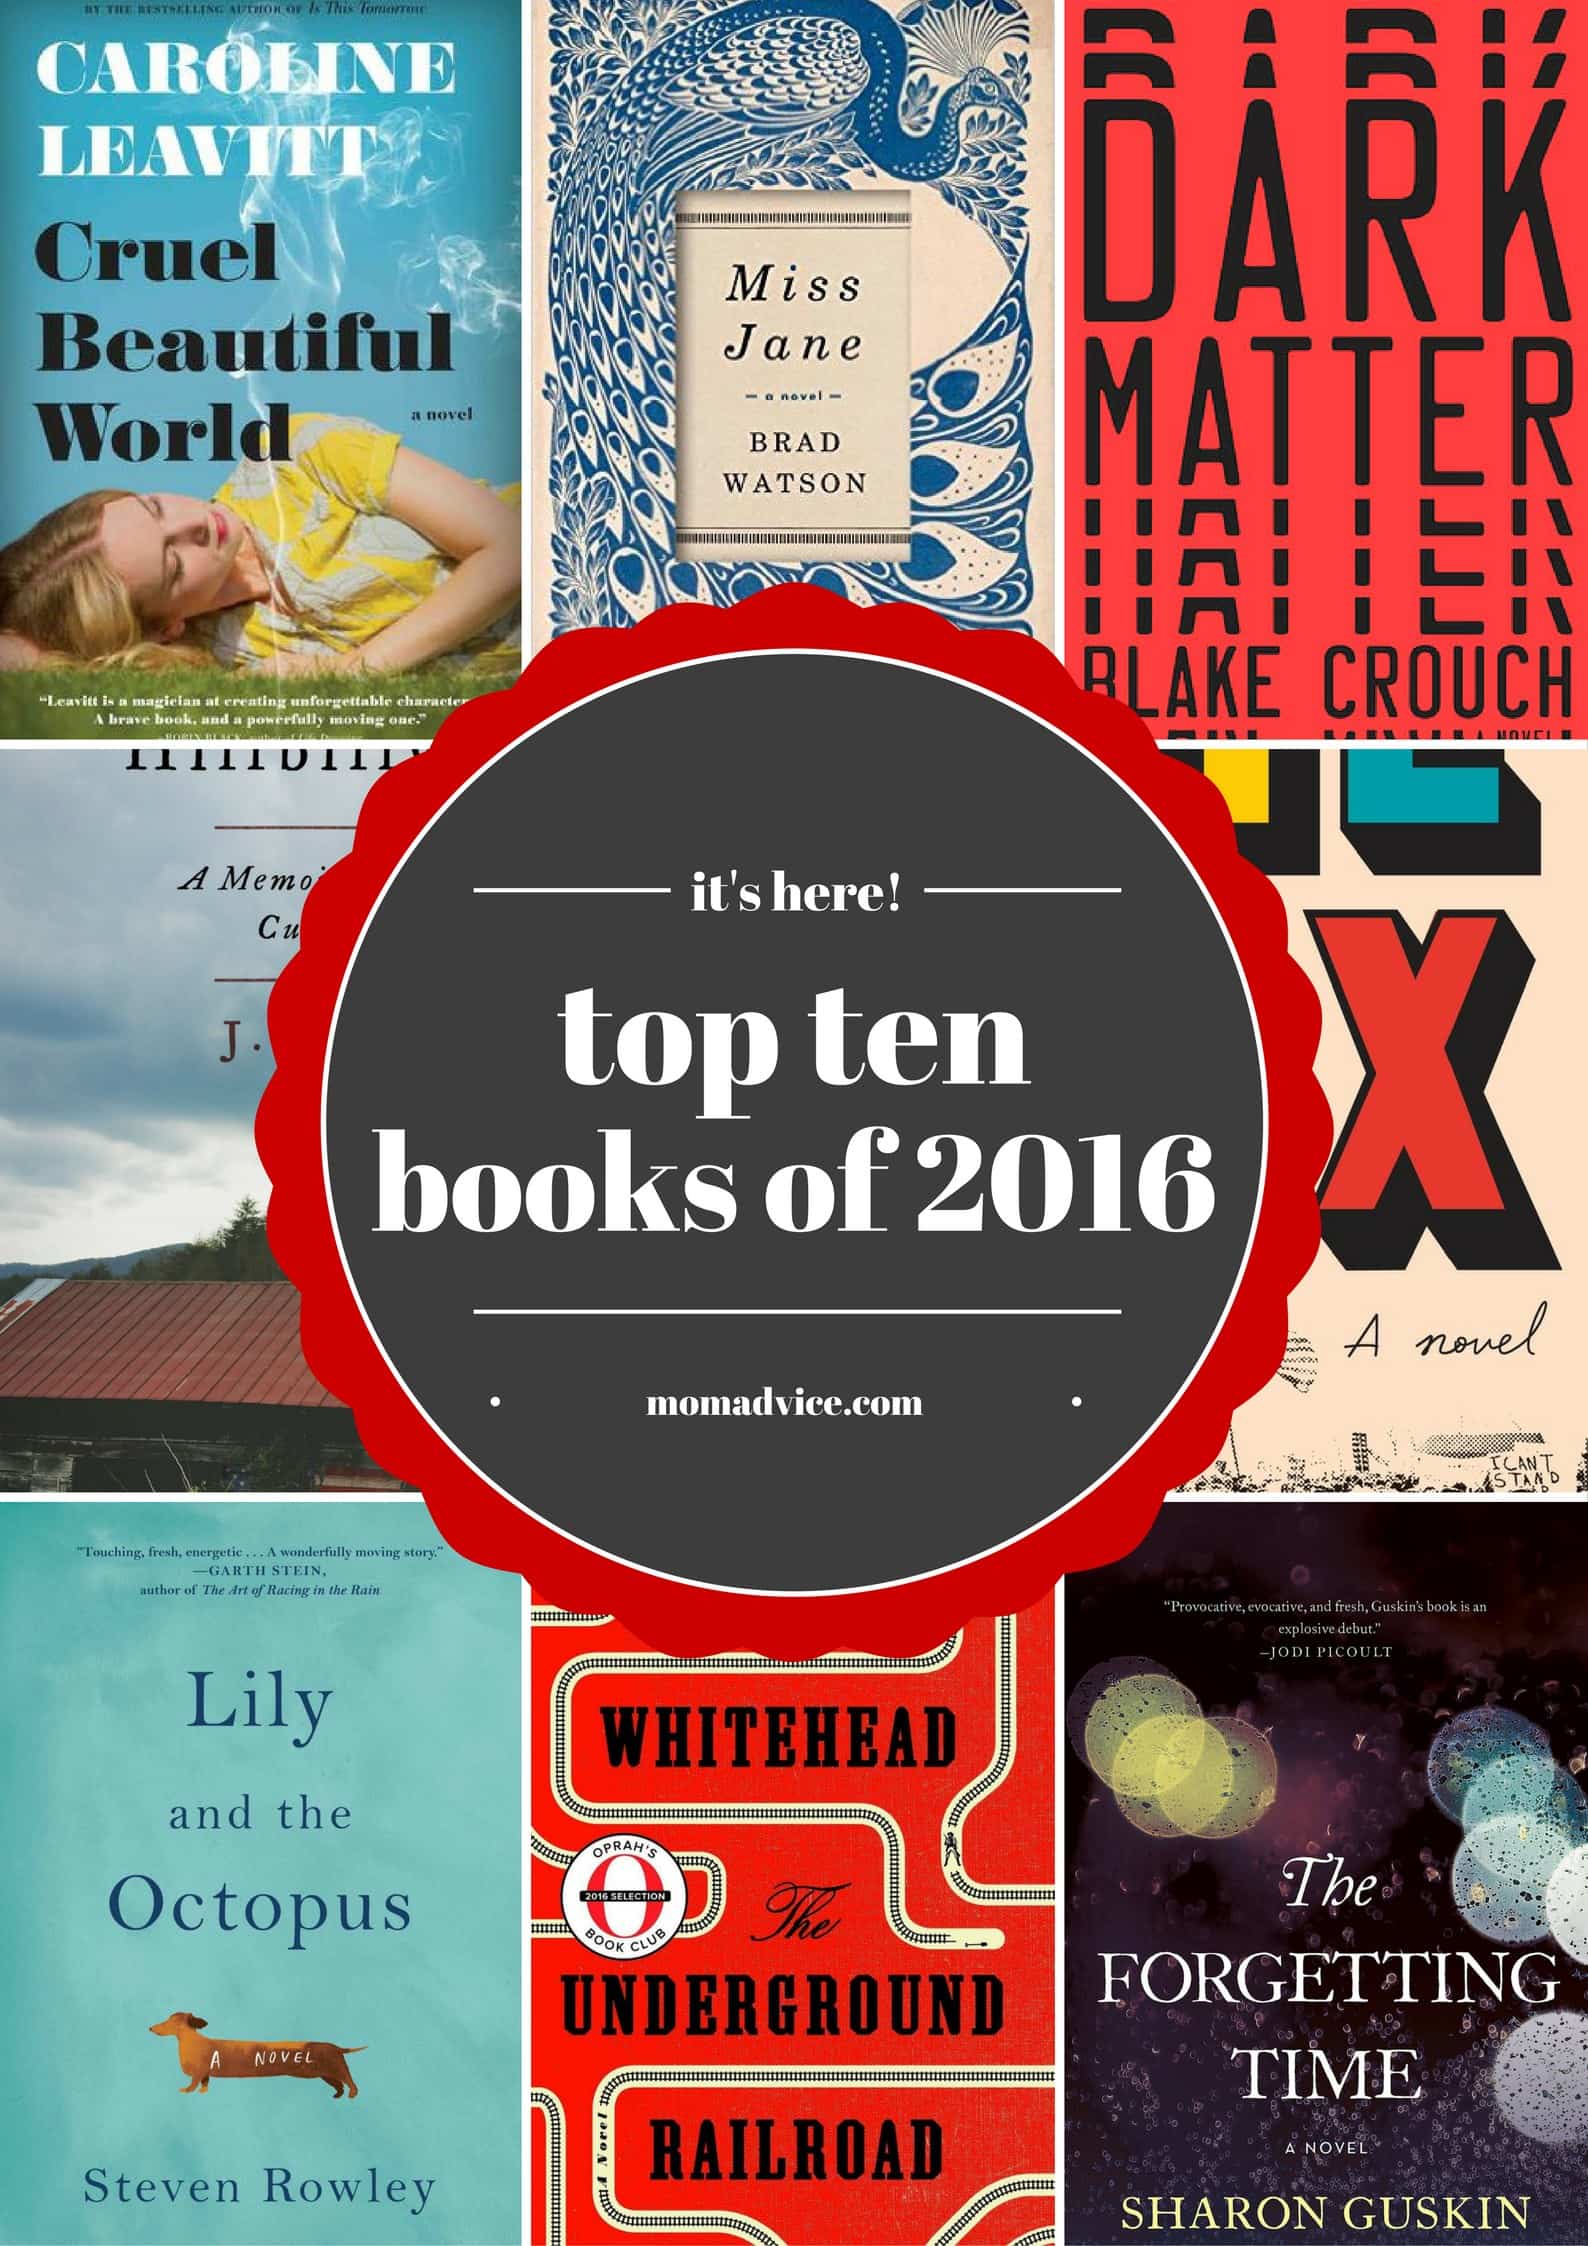 The Best Books of 2016 from MomAdvice.com